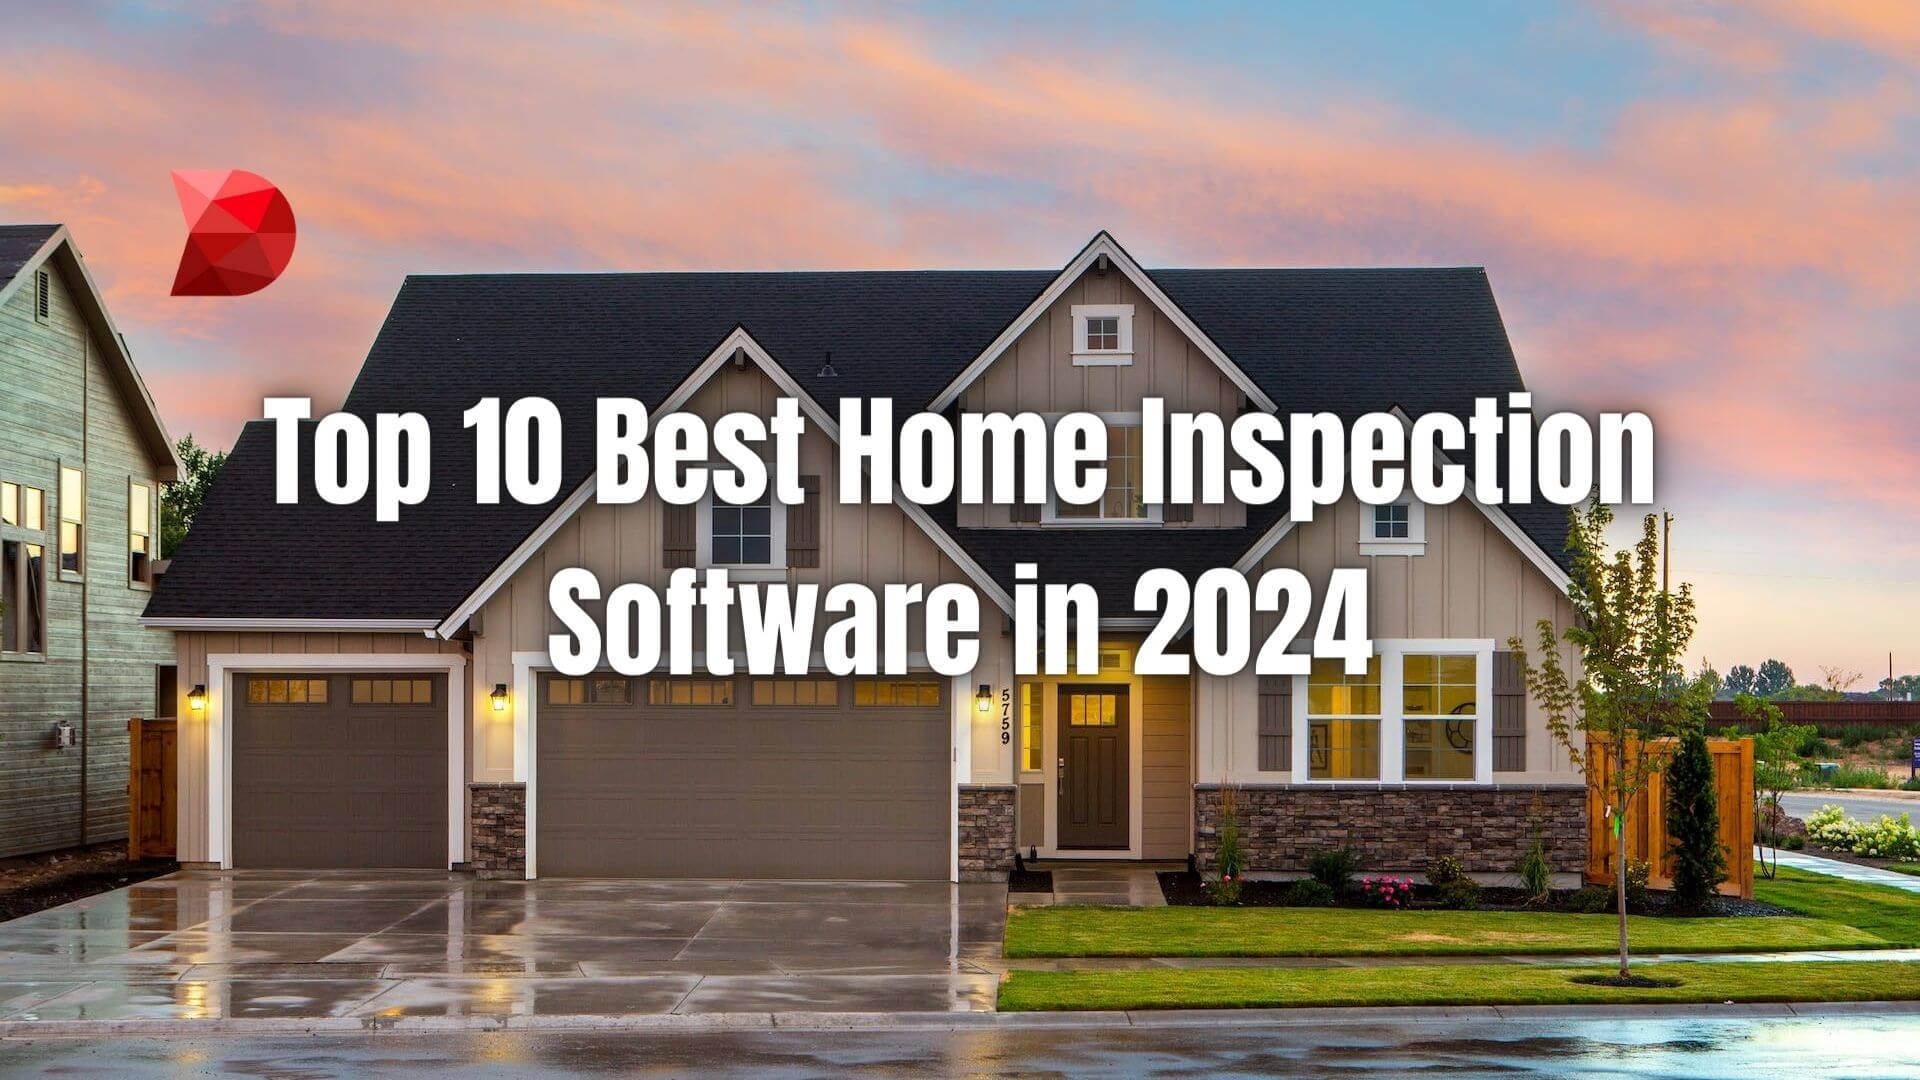 We listed the top five home inspection software of 2024. Read more to check out our list and find the right one for you!